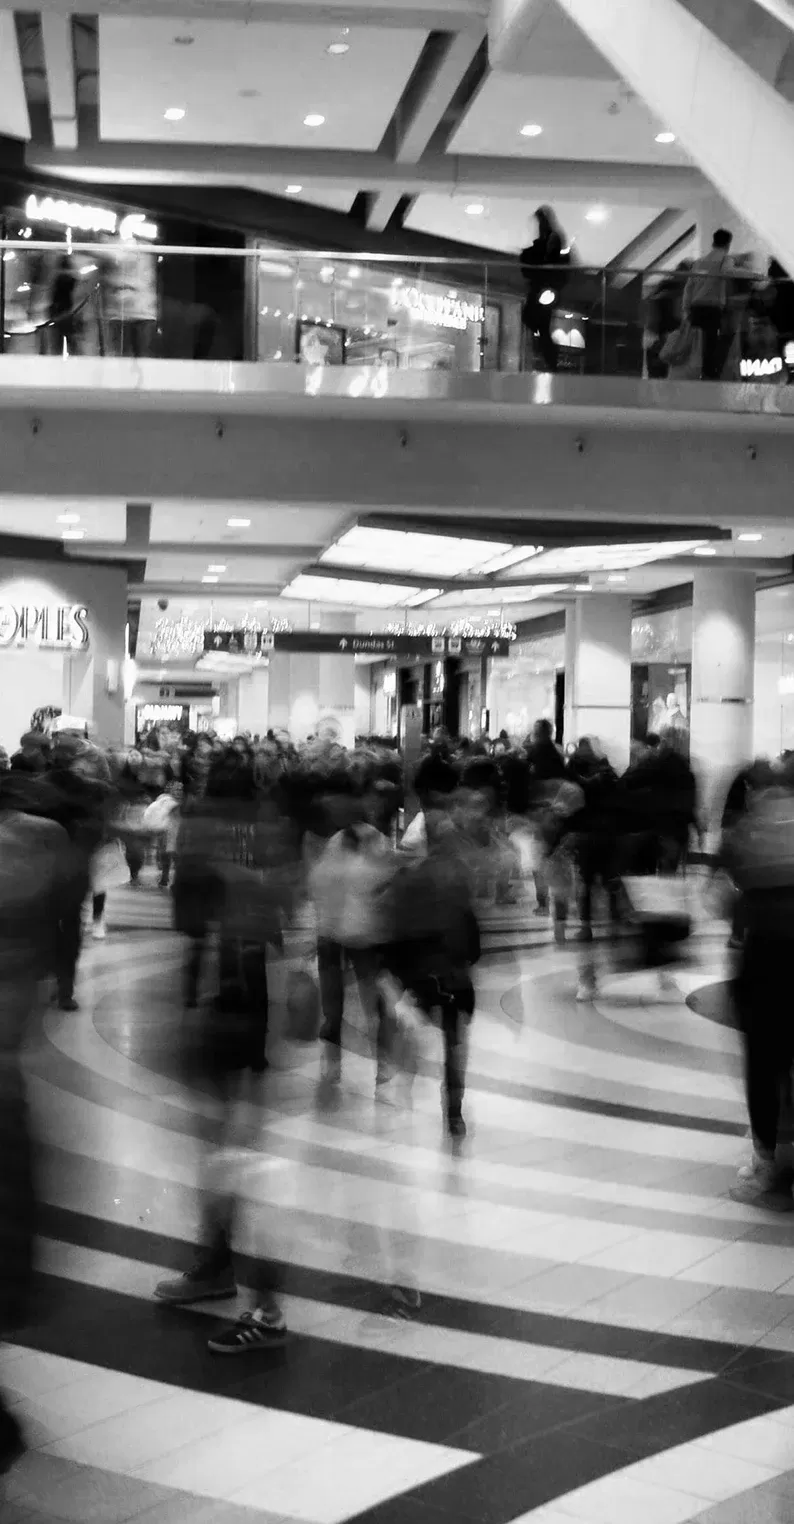 Back and white photo with long exposure of people walking through a shopping centre